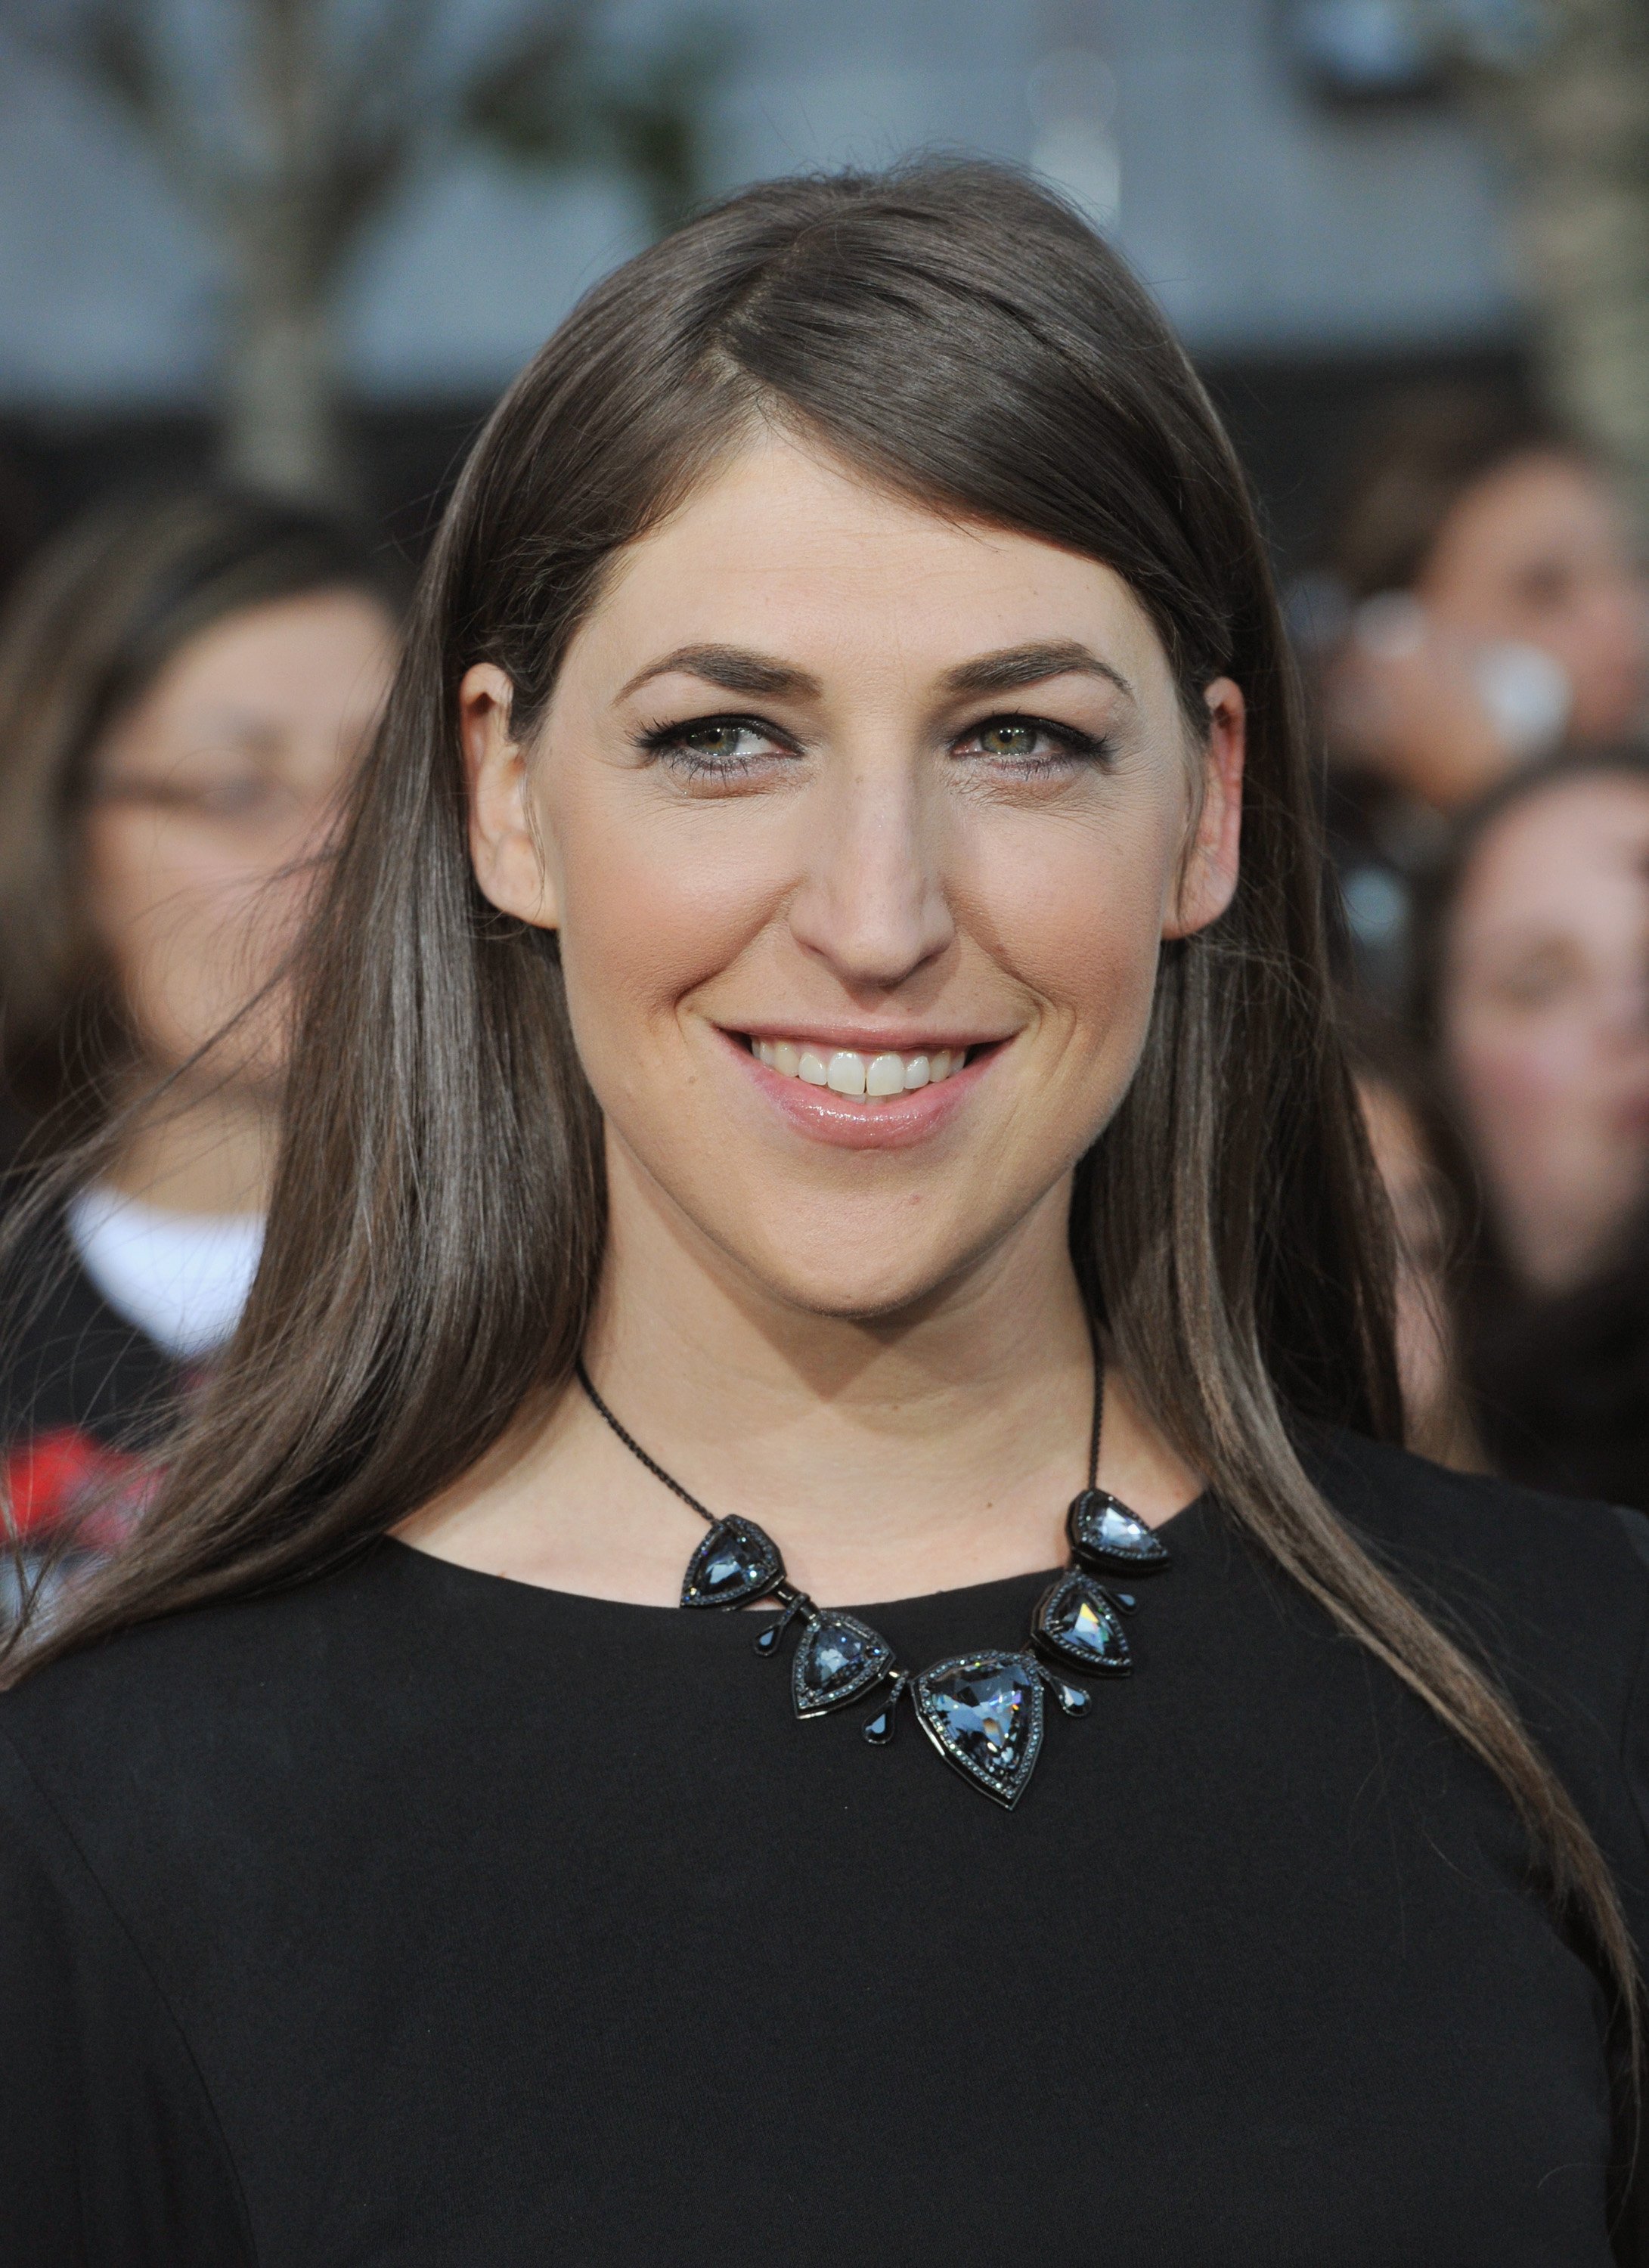 Actress Mayim Bialik at the Nokia Theatre L.A. Live on November 12, 2012 in Los Angeles, California. | Source: Getty Images